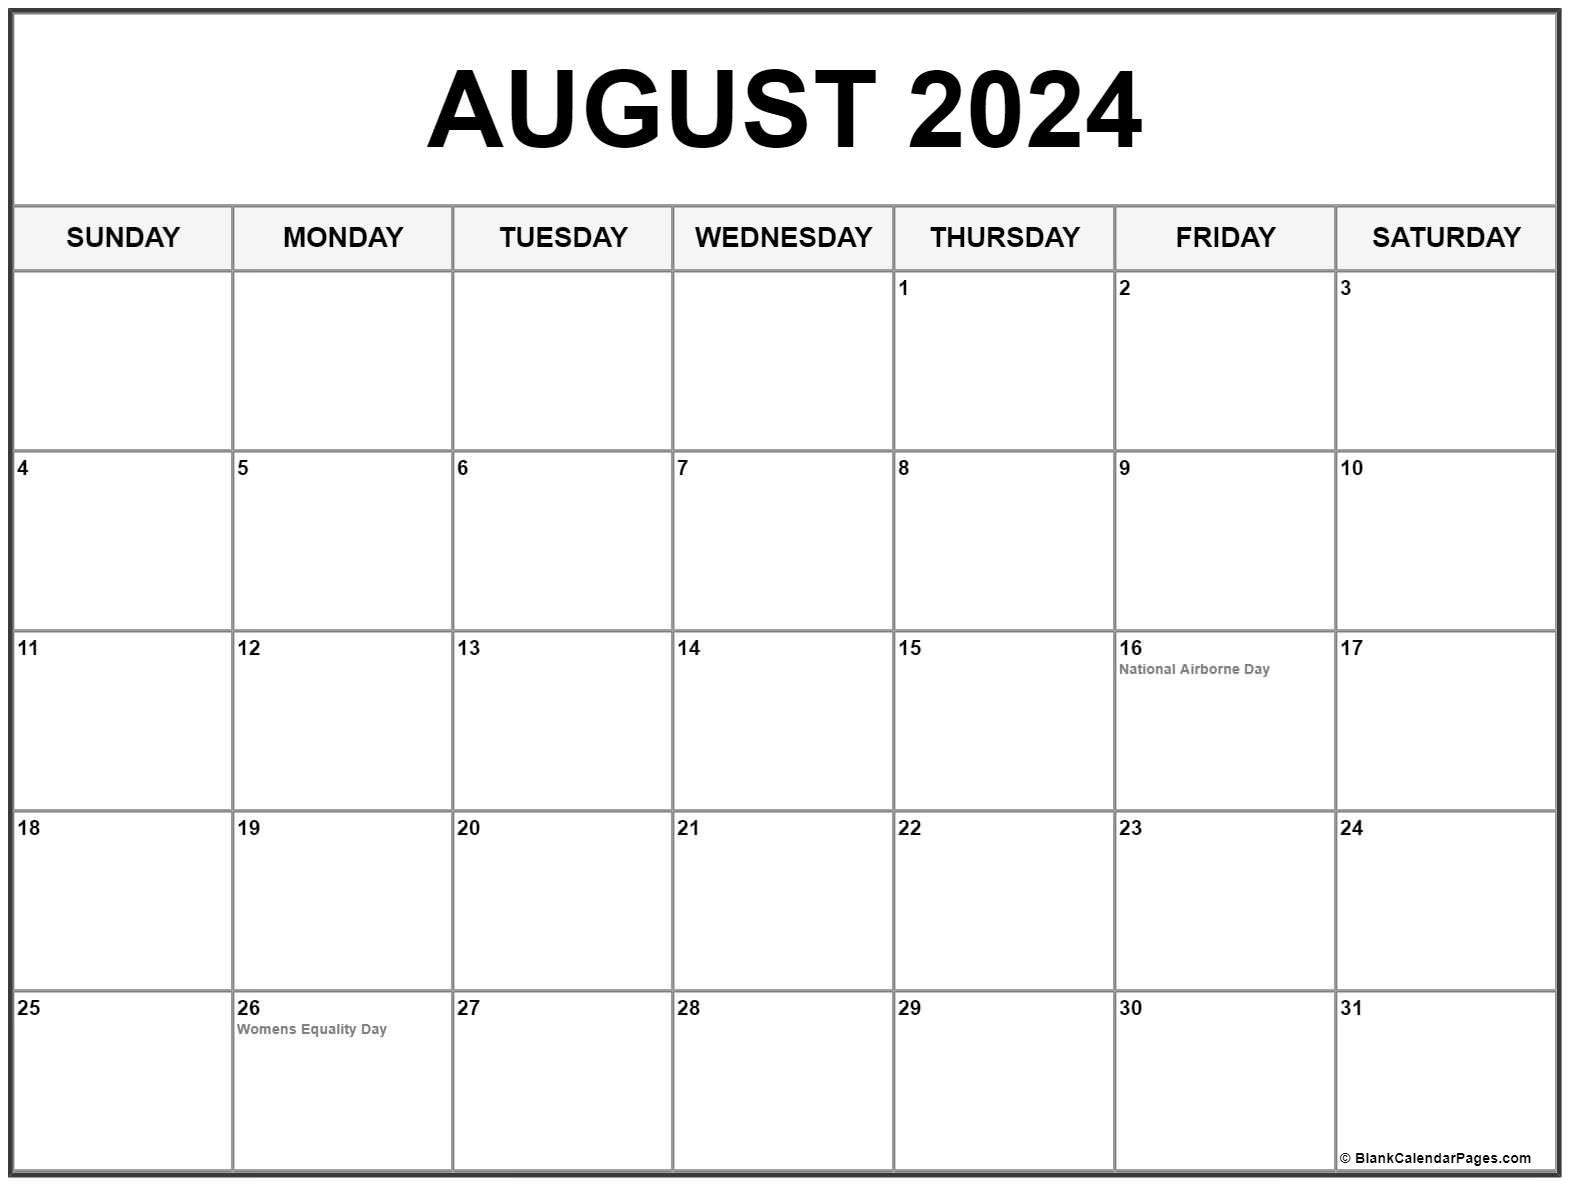 August 2024 Printable Calendar With Holidays 2024 CALENDAR PRINTABLE - Free Printable Calendar Aug Coloring Pages 2024